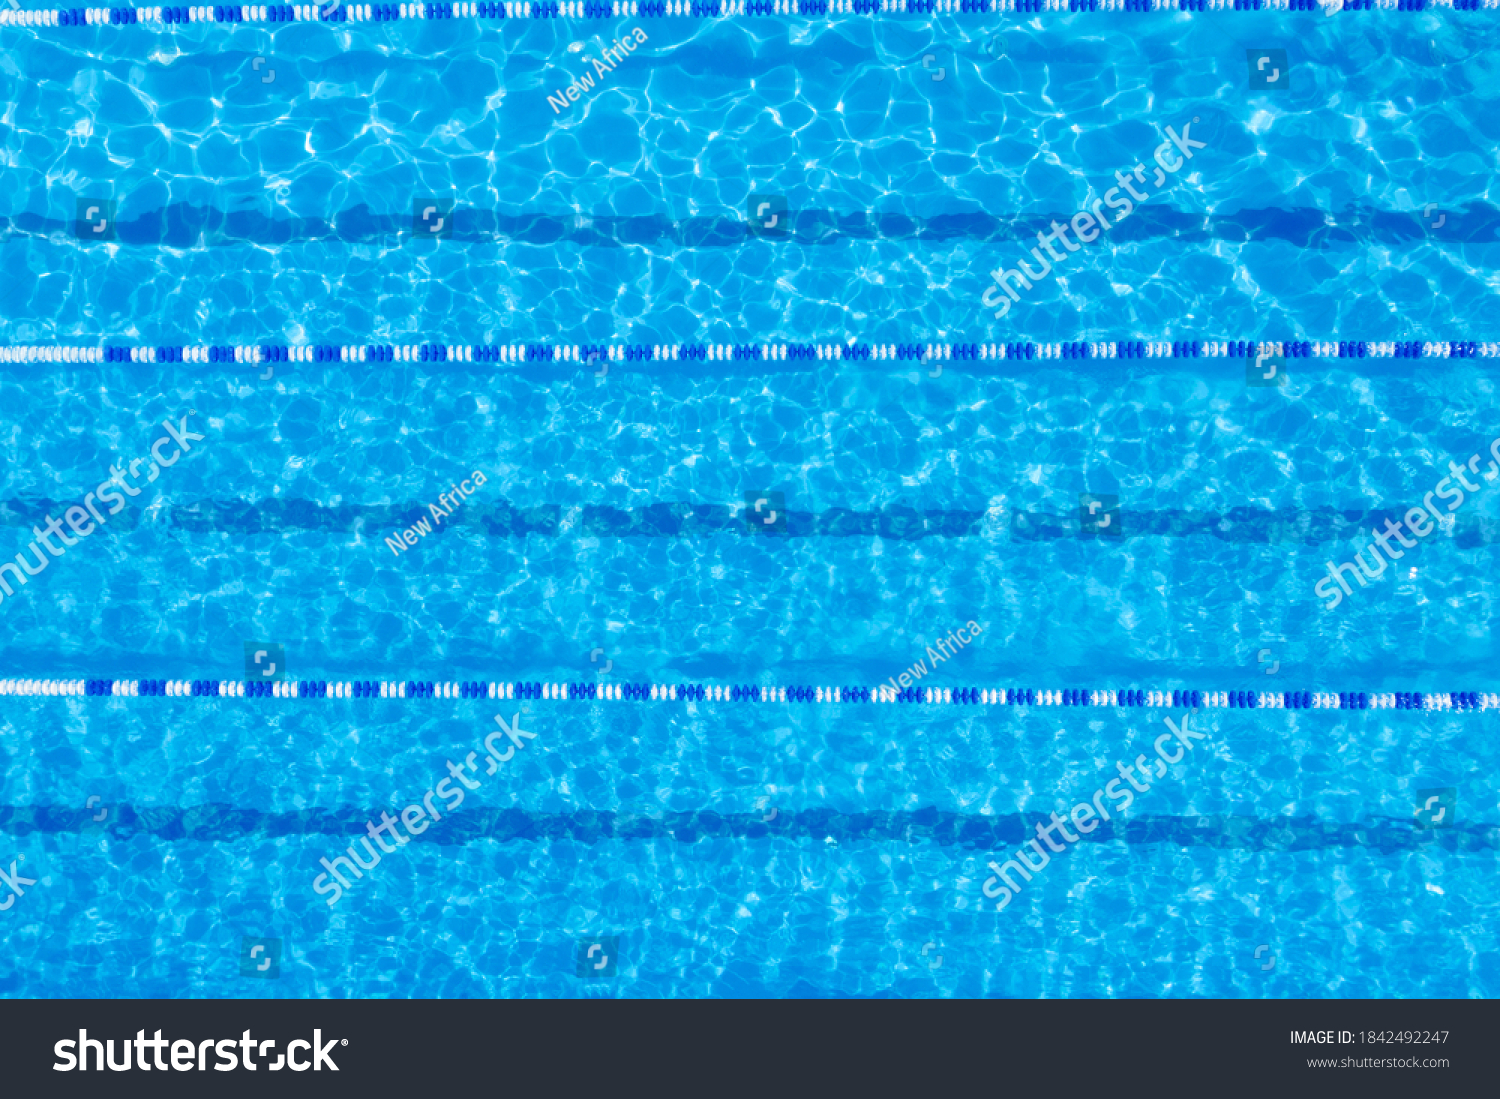 Swimming pool with racing lane dividers, top view #1842492247